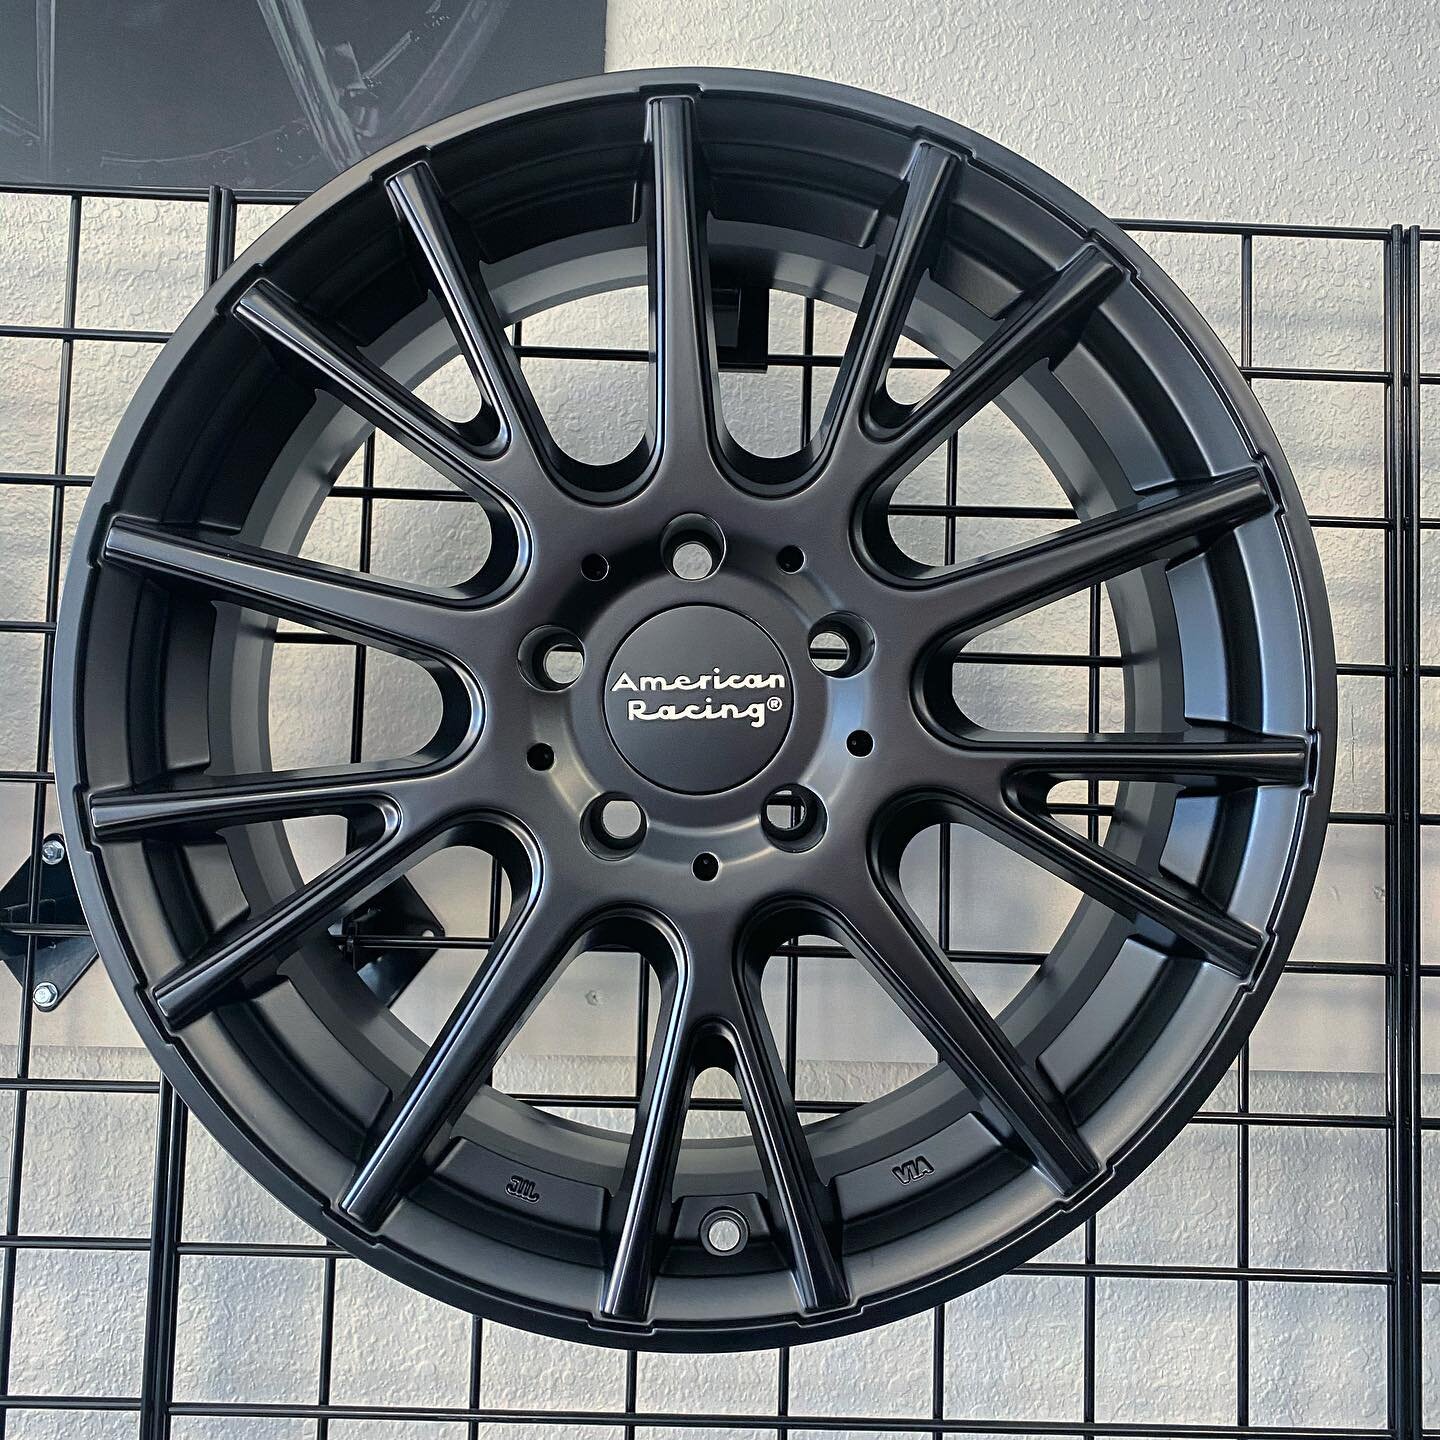 Just $15 down for this 17&rdquo; American racing wheel in satin black! Pick this up and drive off the lot with these TODAY!!
.
.
.
.
.
.
.
.
.
.
.
#americanracing #americanracingwheels #blackrims #blackwheels #affordablestyle #automotive #nocreditche